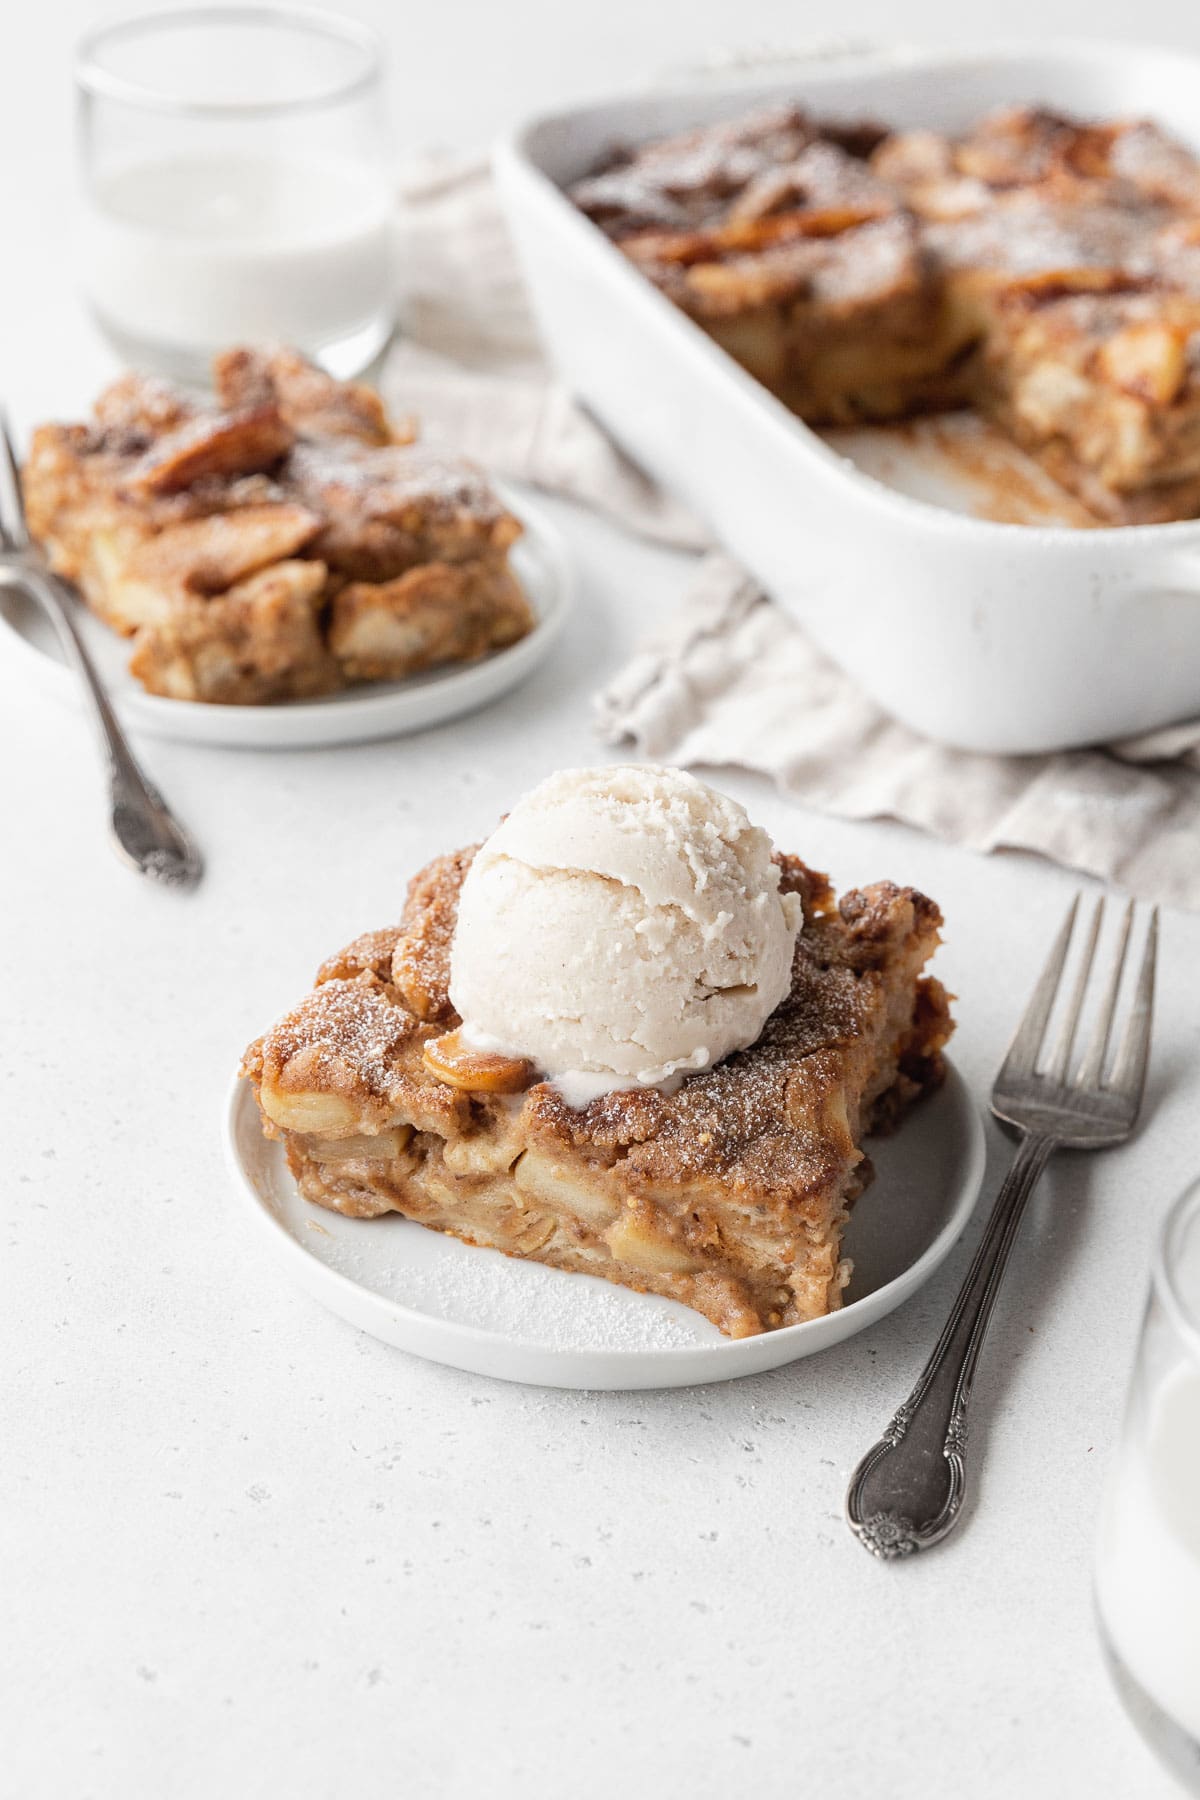 A slice of vegan bread pudding on a white plate, topped with vegan vanilla ice cream, with another plate of bread pudding and a white casserole dish in the back of the scene.